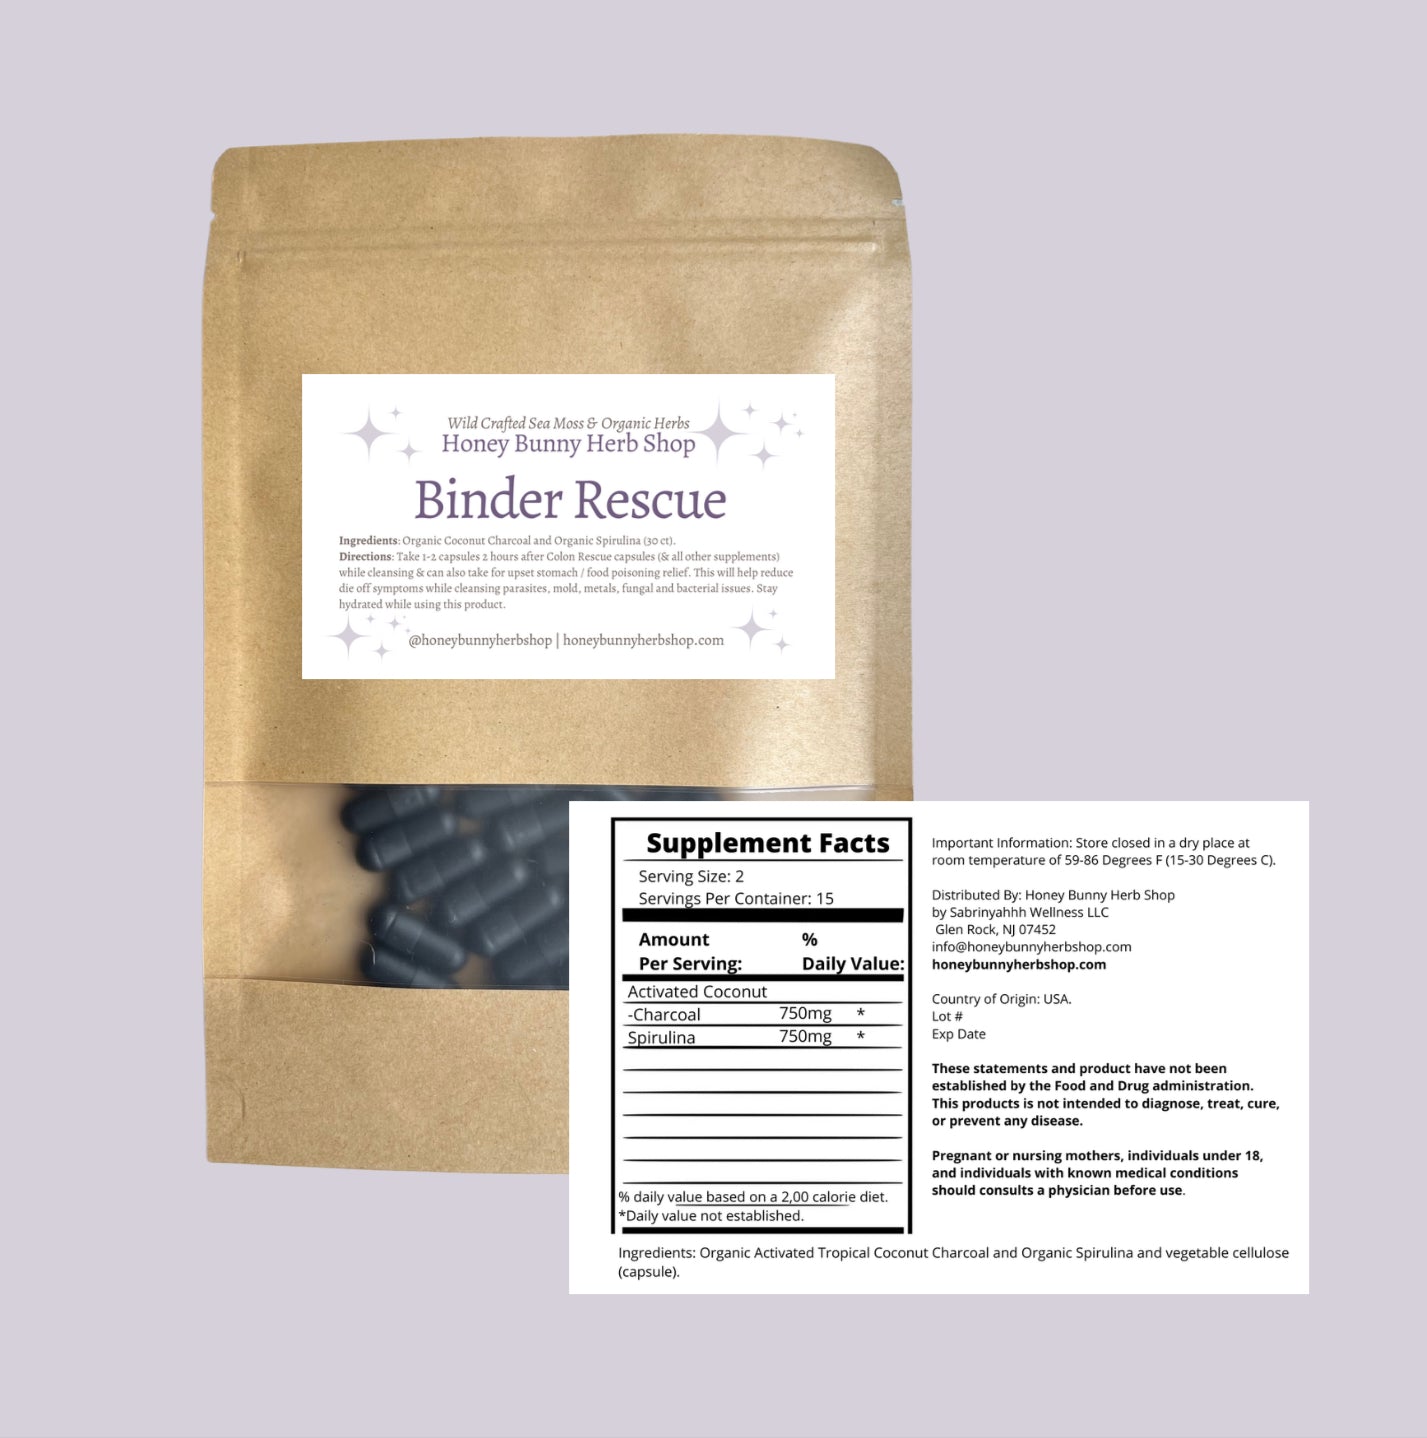 Binder Rescue (parasite, mold, metal, bacterial, fungal/yeast, toxin binder & upset stomach relief)